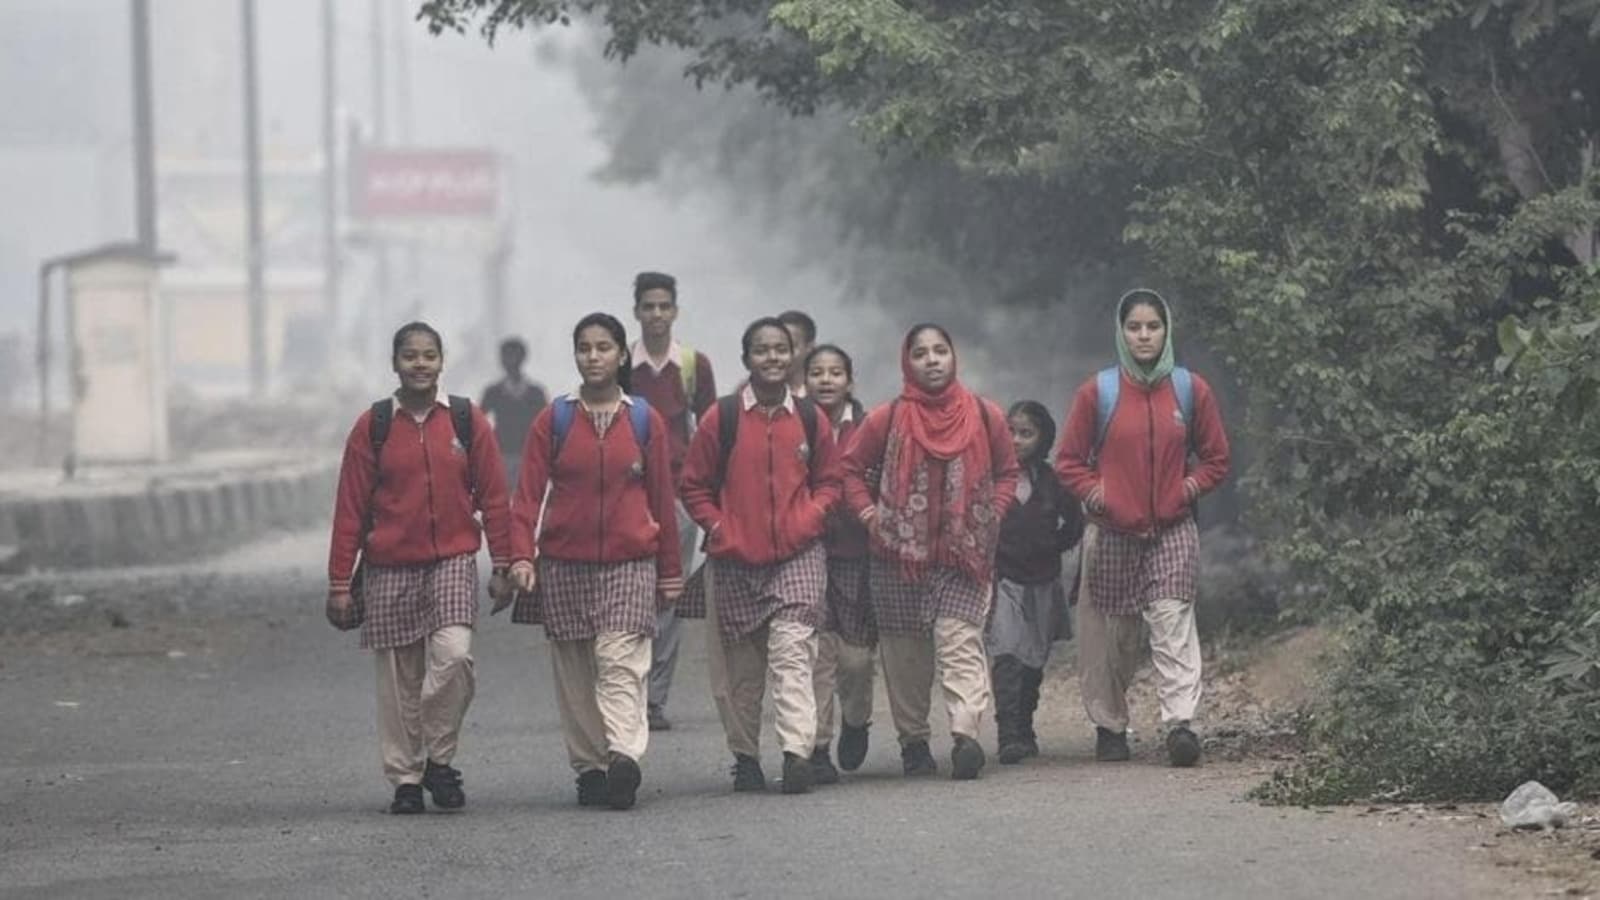 Delhi schools closed for all due to extreme cold, remedial classes cancelled